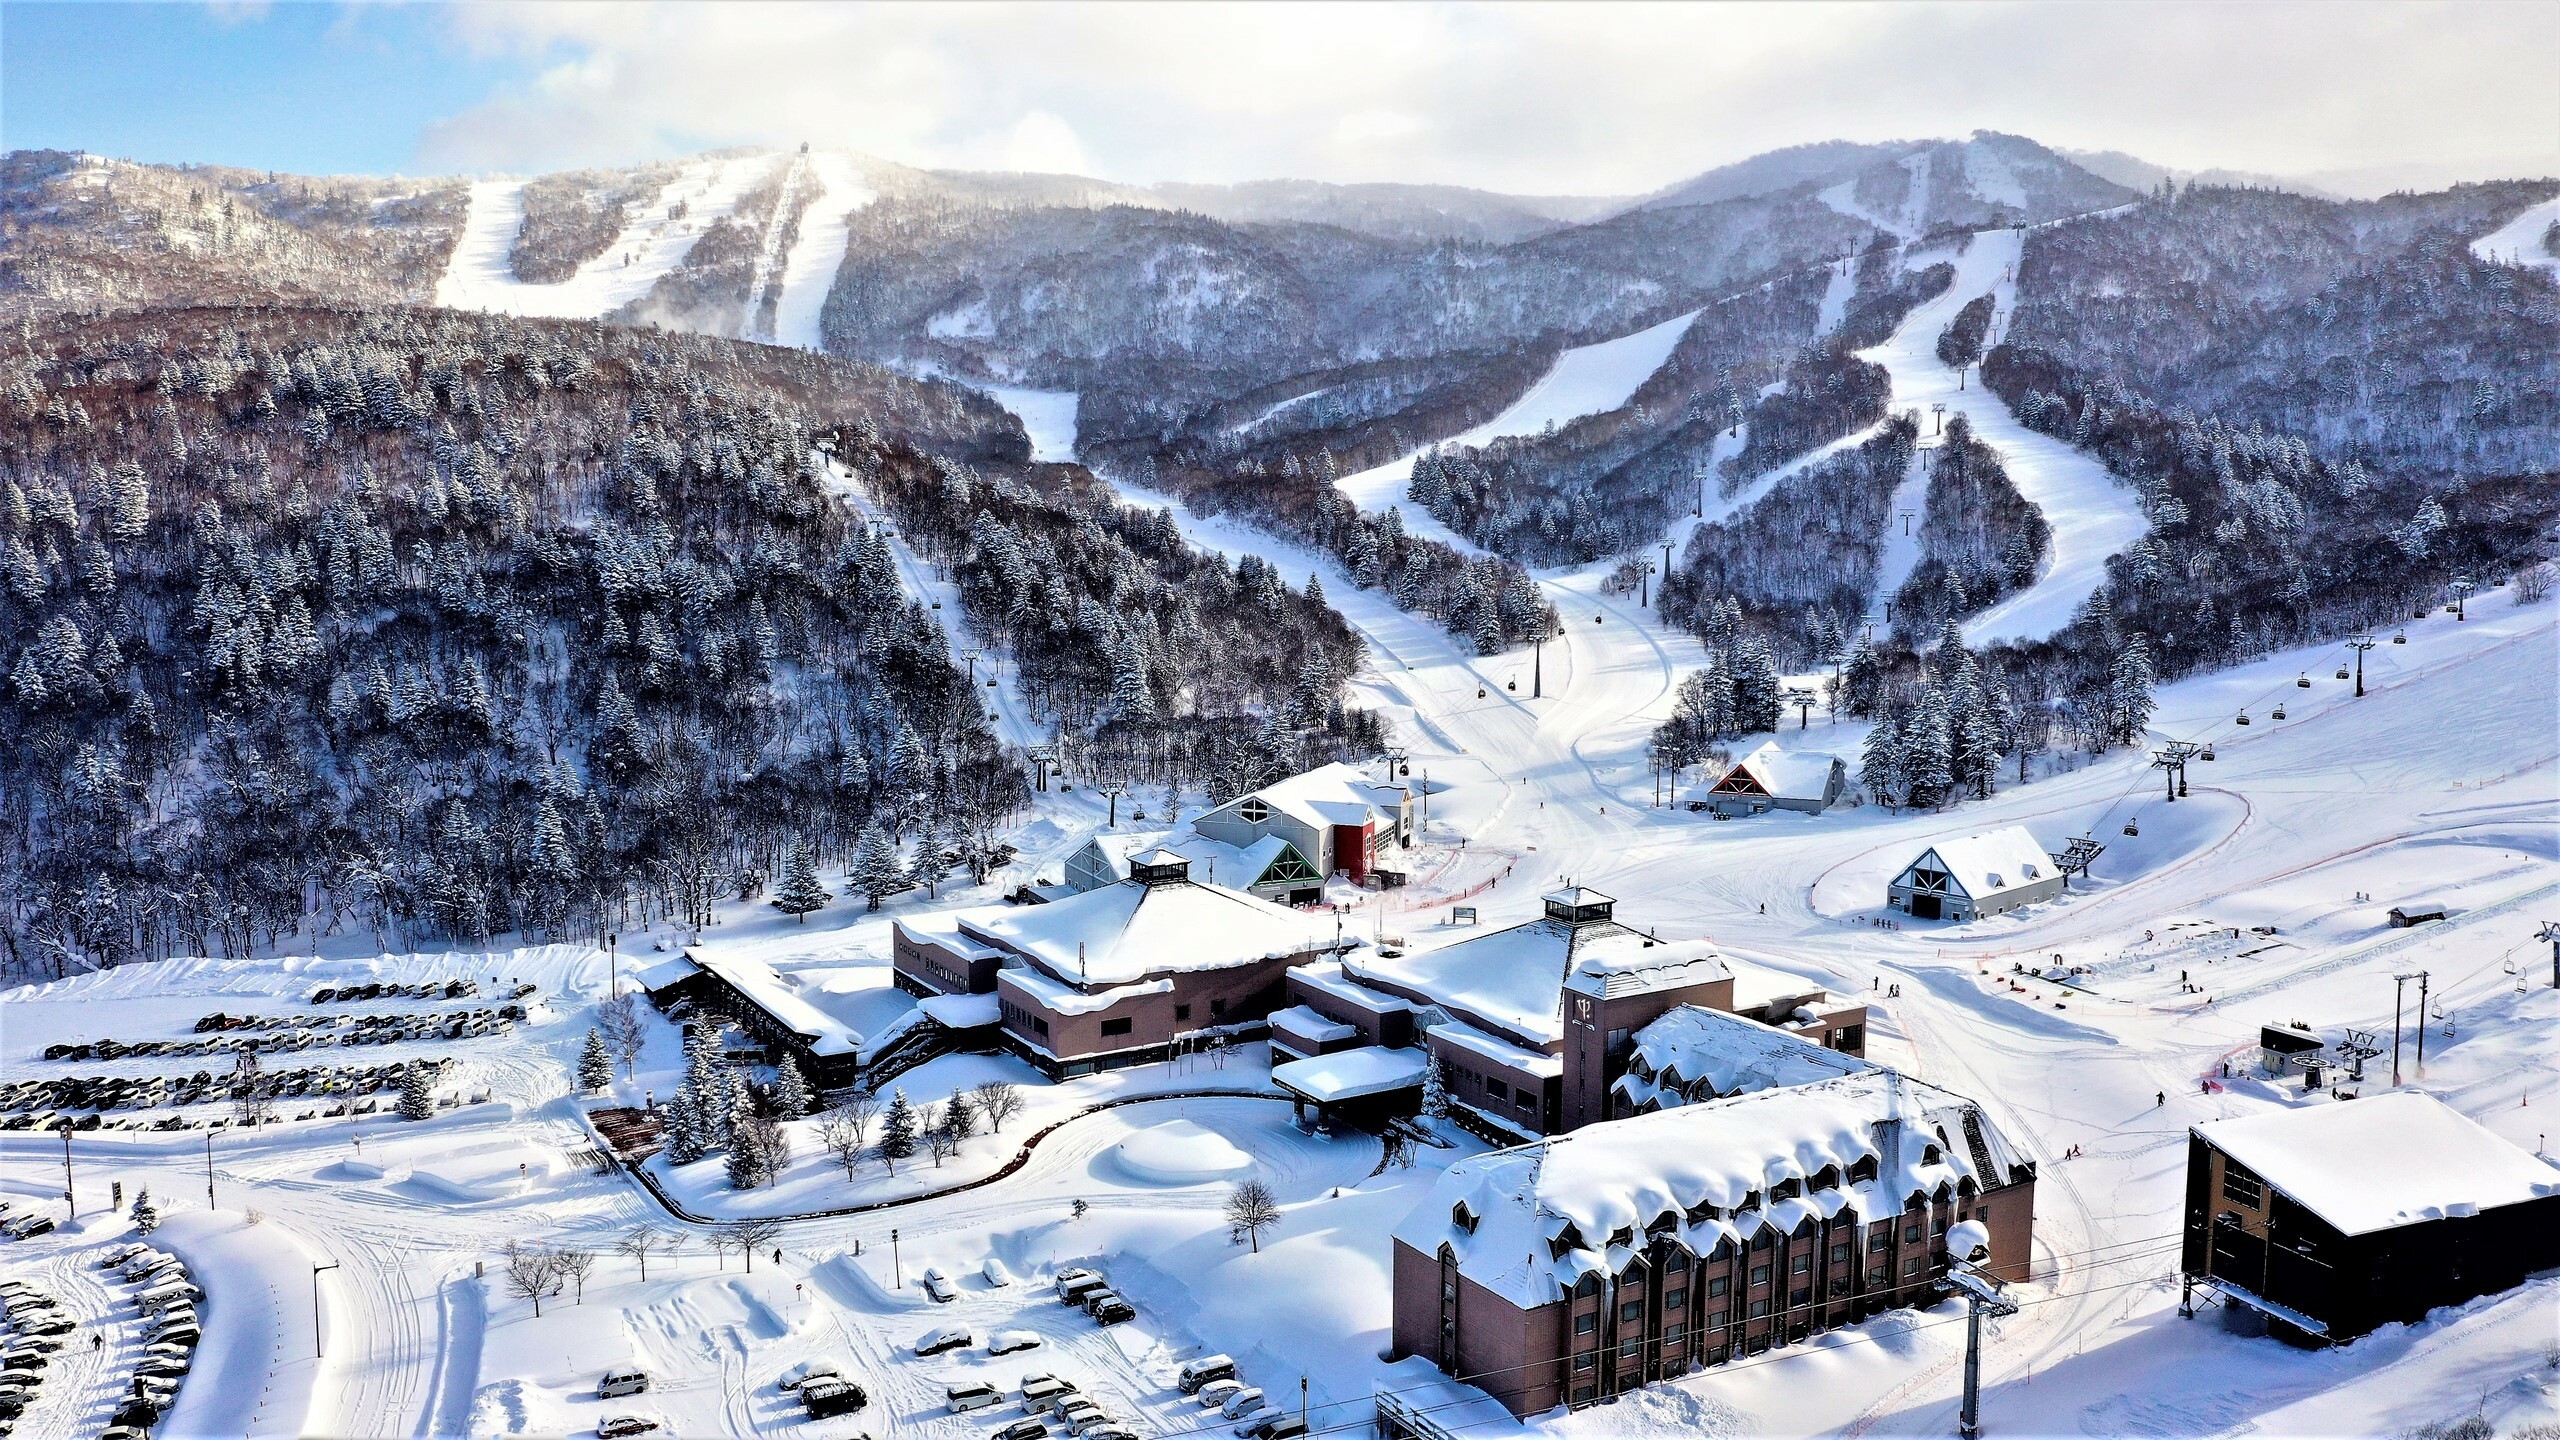 A new Club Med ski resort is opening in Hokkaido this winter